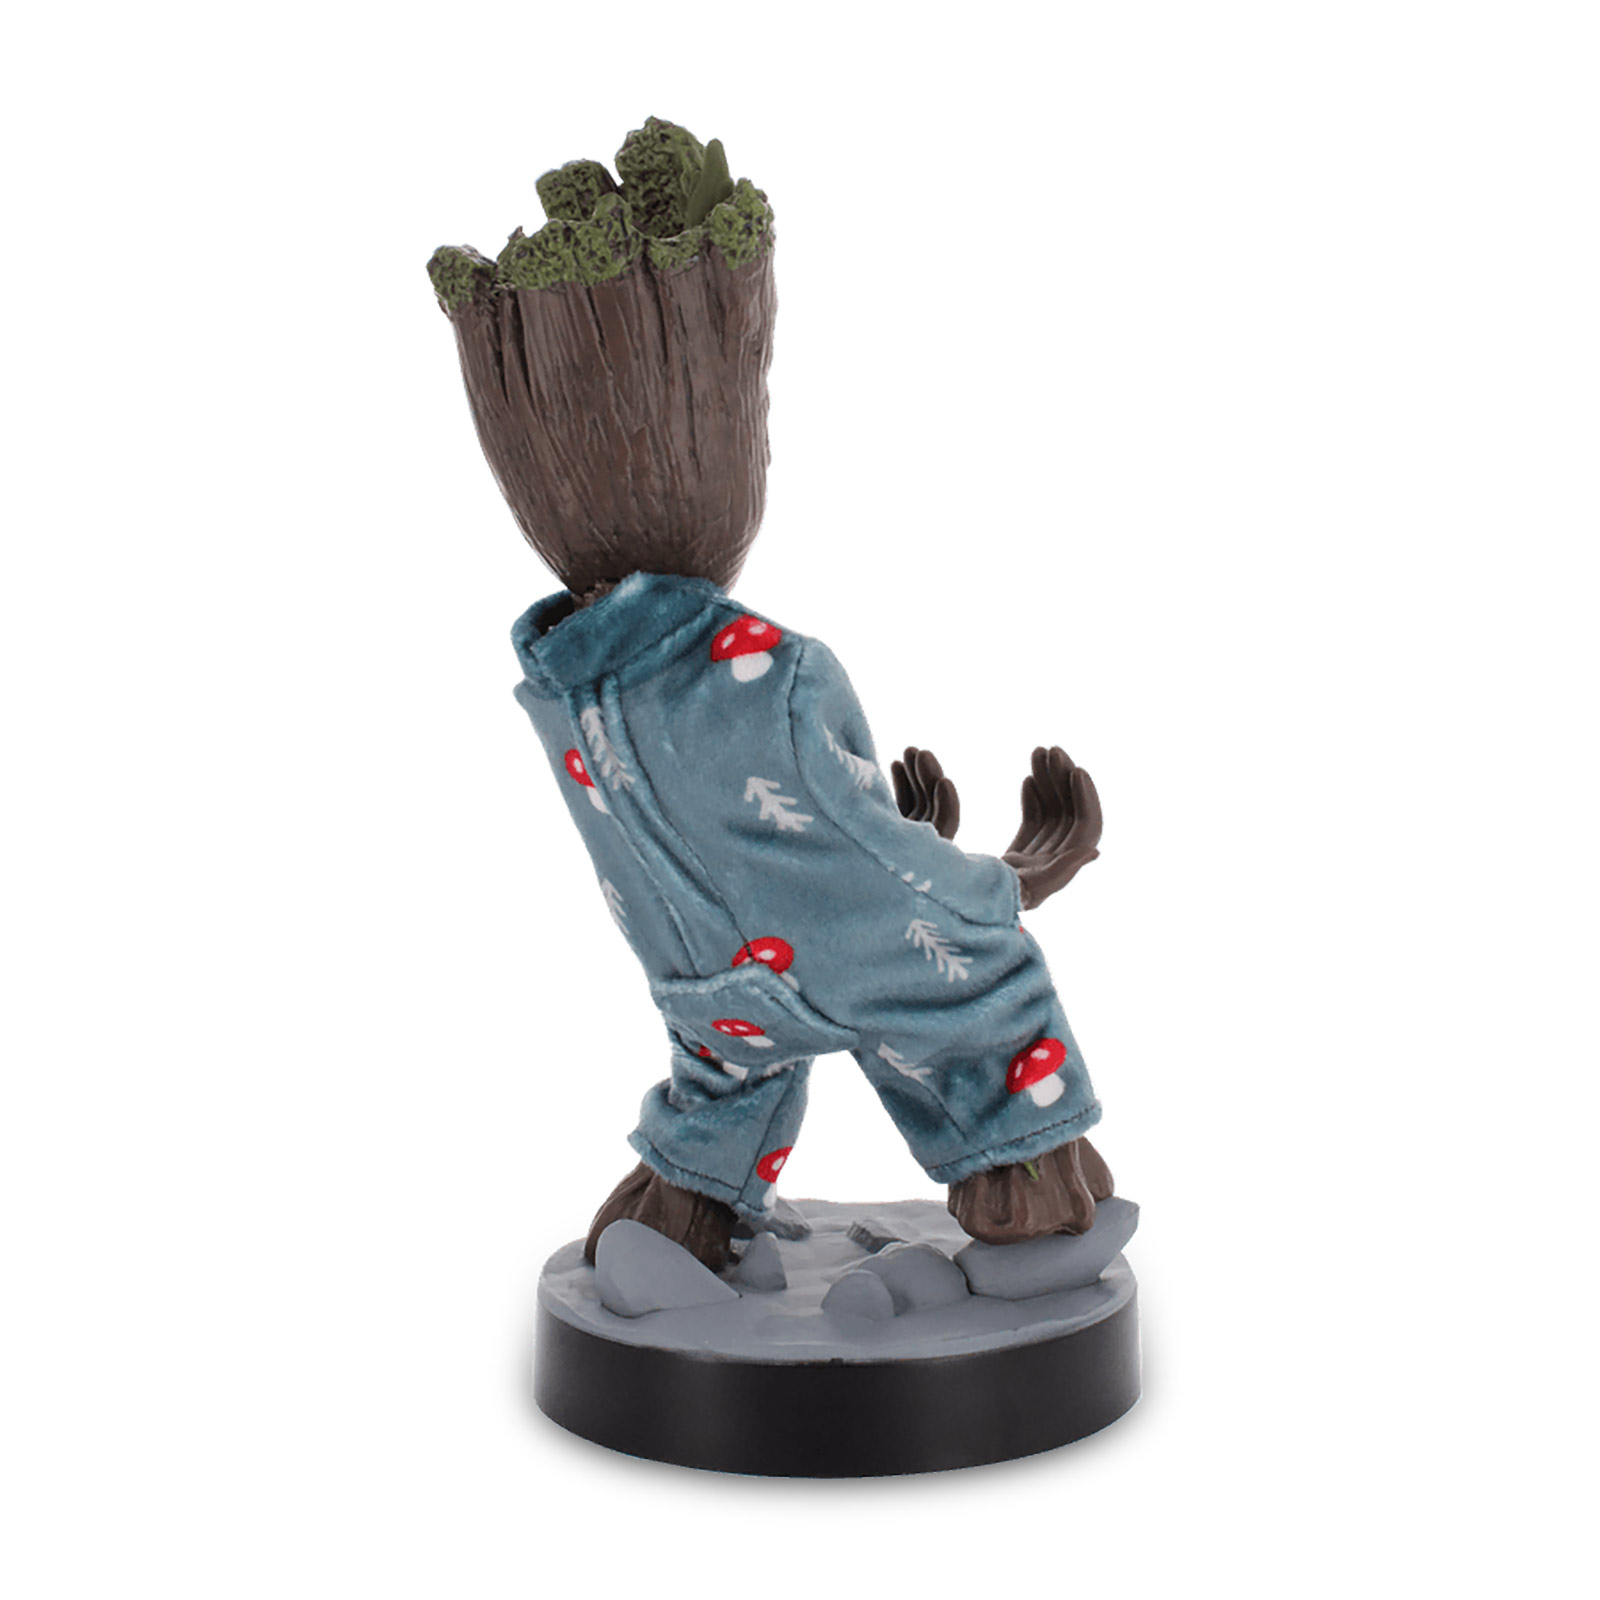 Guardians of the Galaxy - Pyjama Groot Cable Guy Figure